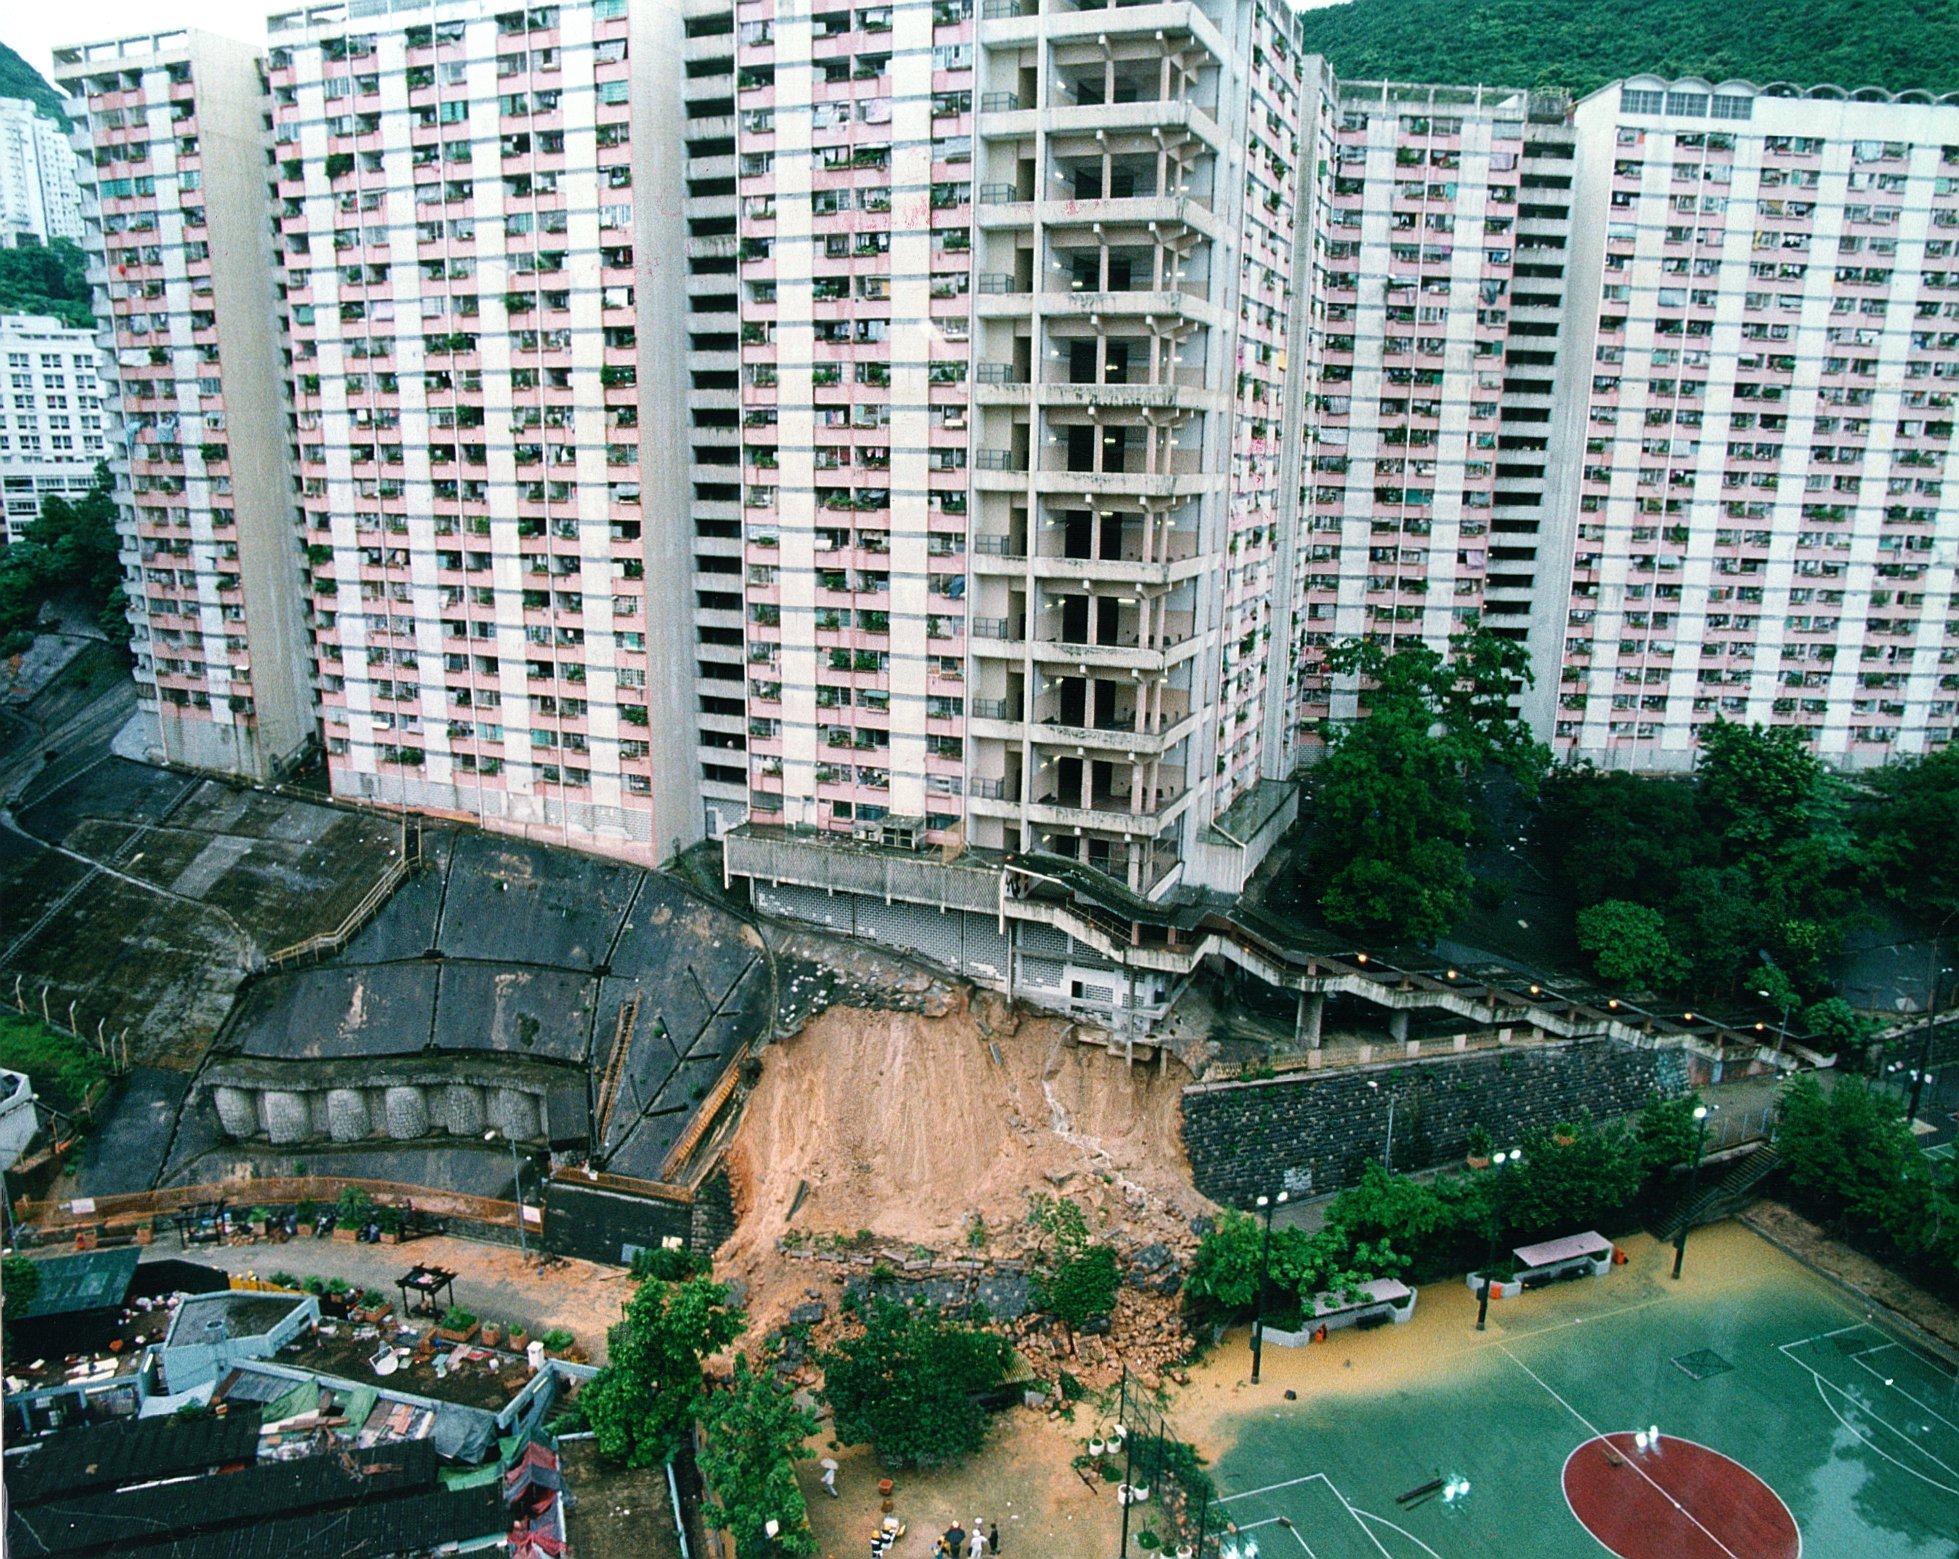 1994’s landslide at Kwun Lung Lau housing estate in Kennedy Town killed three people, including a 9-year-old girl and her father. Photo: Eric Li 